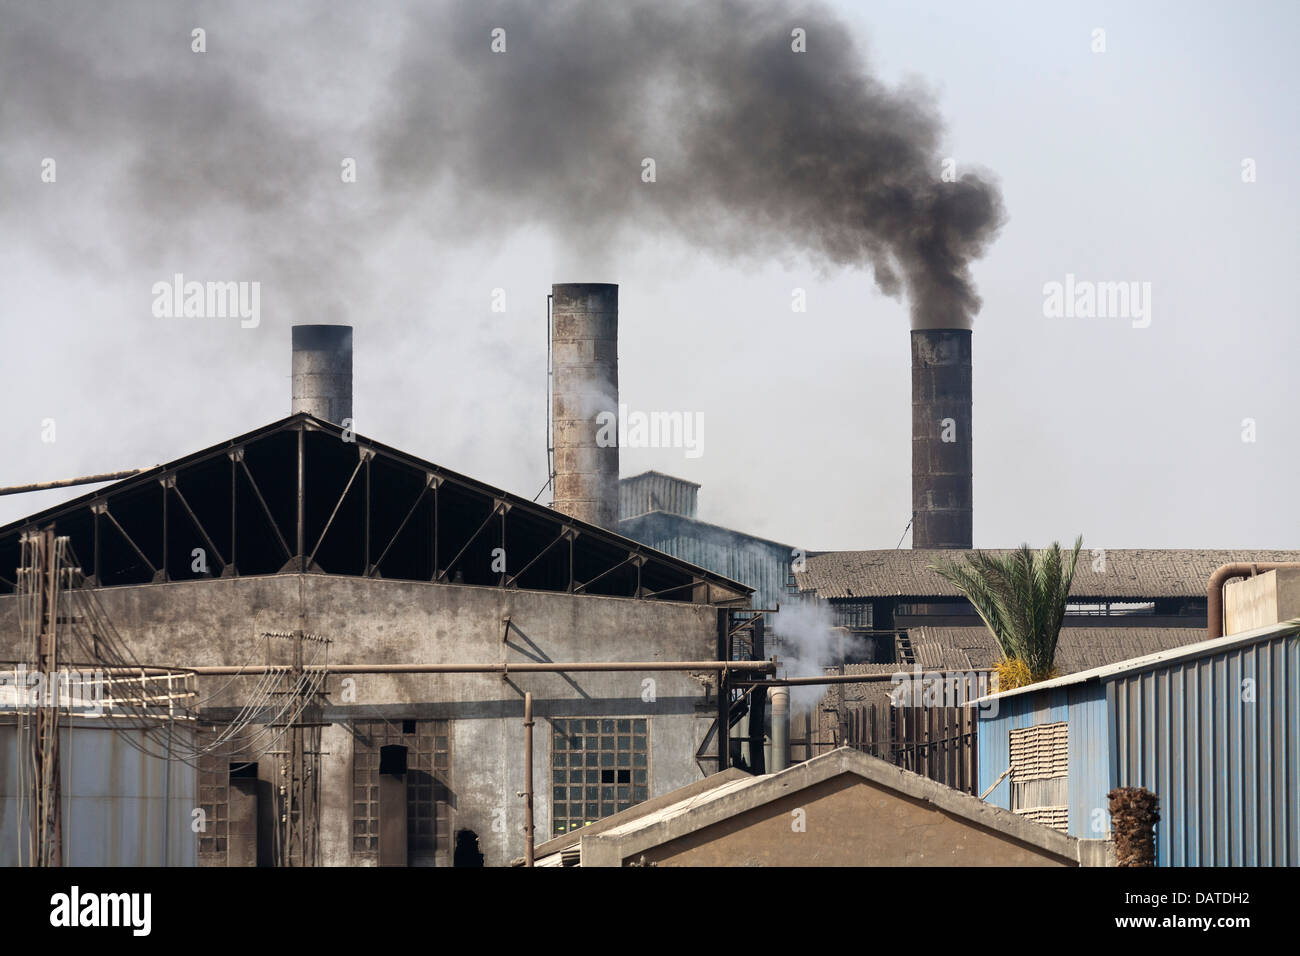 Smoking factory chimneys on the banks of the river Nile Egypt Africa Stock Photo